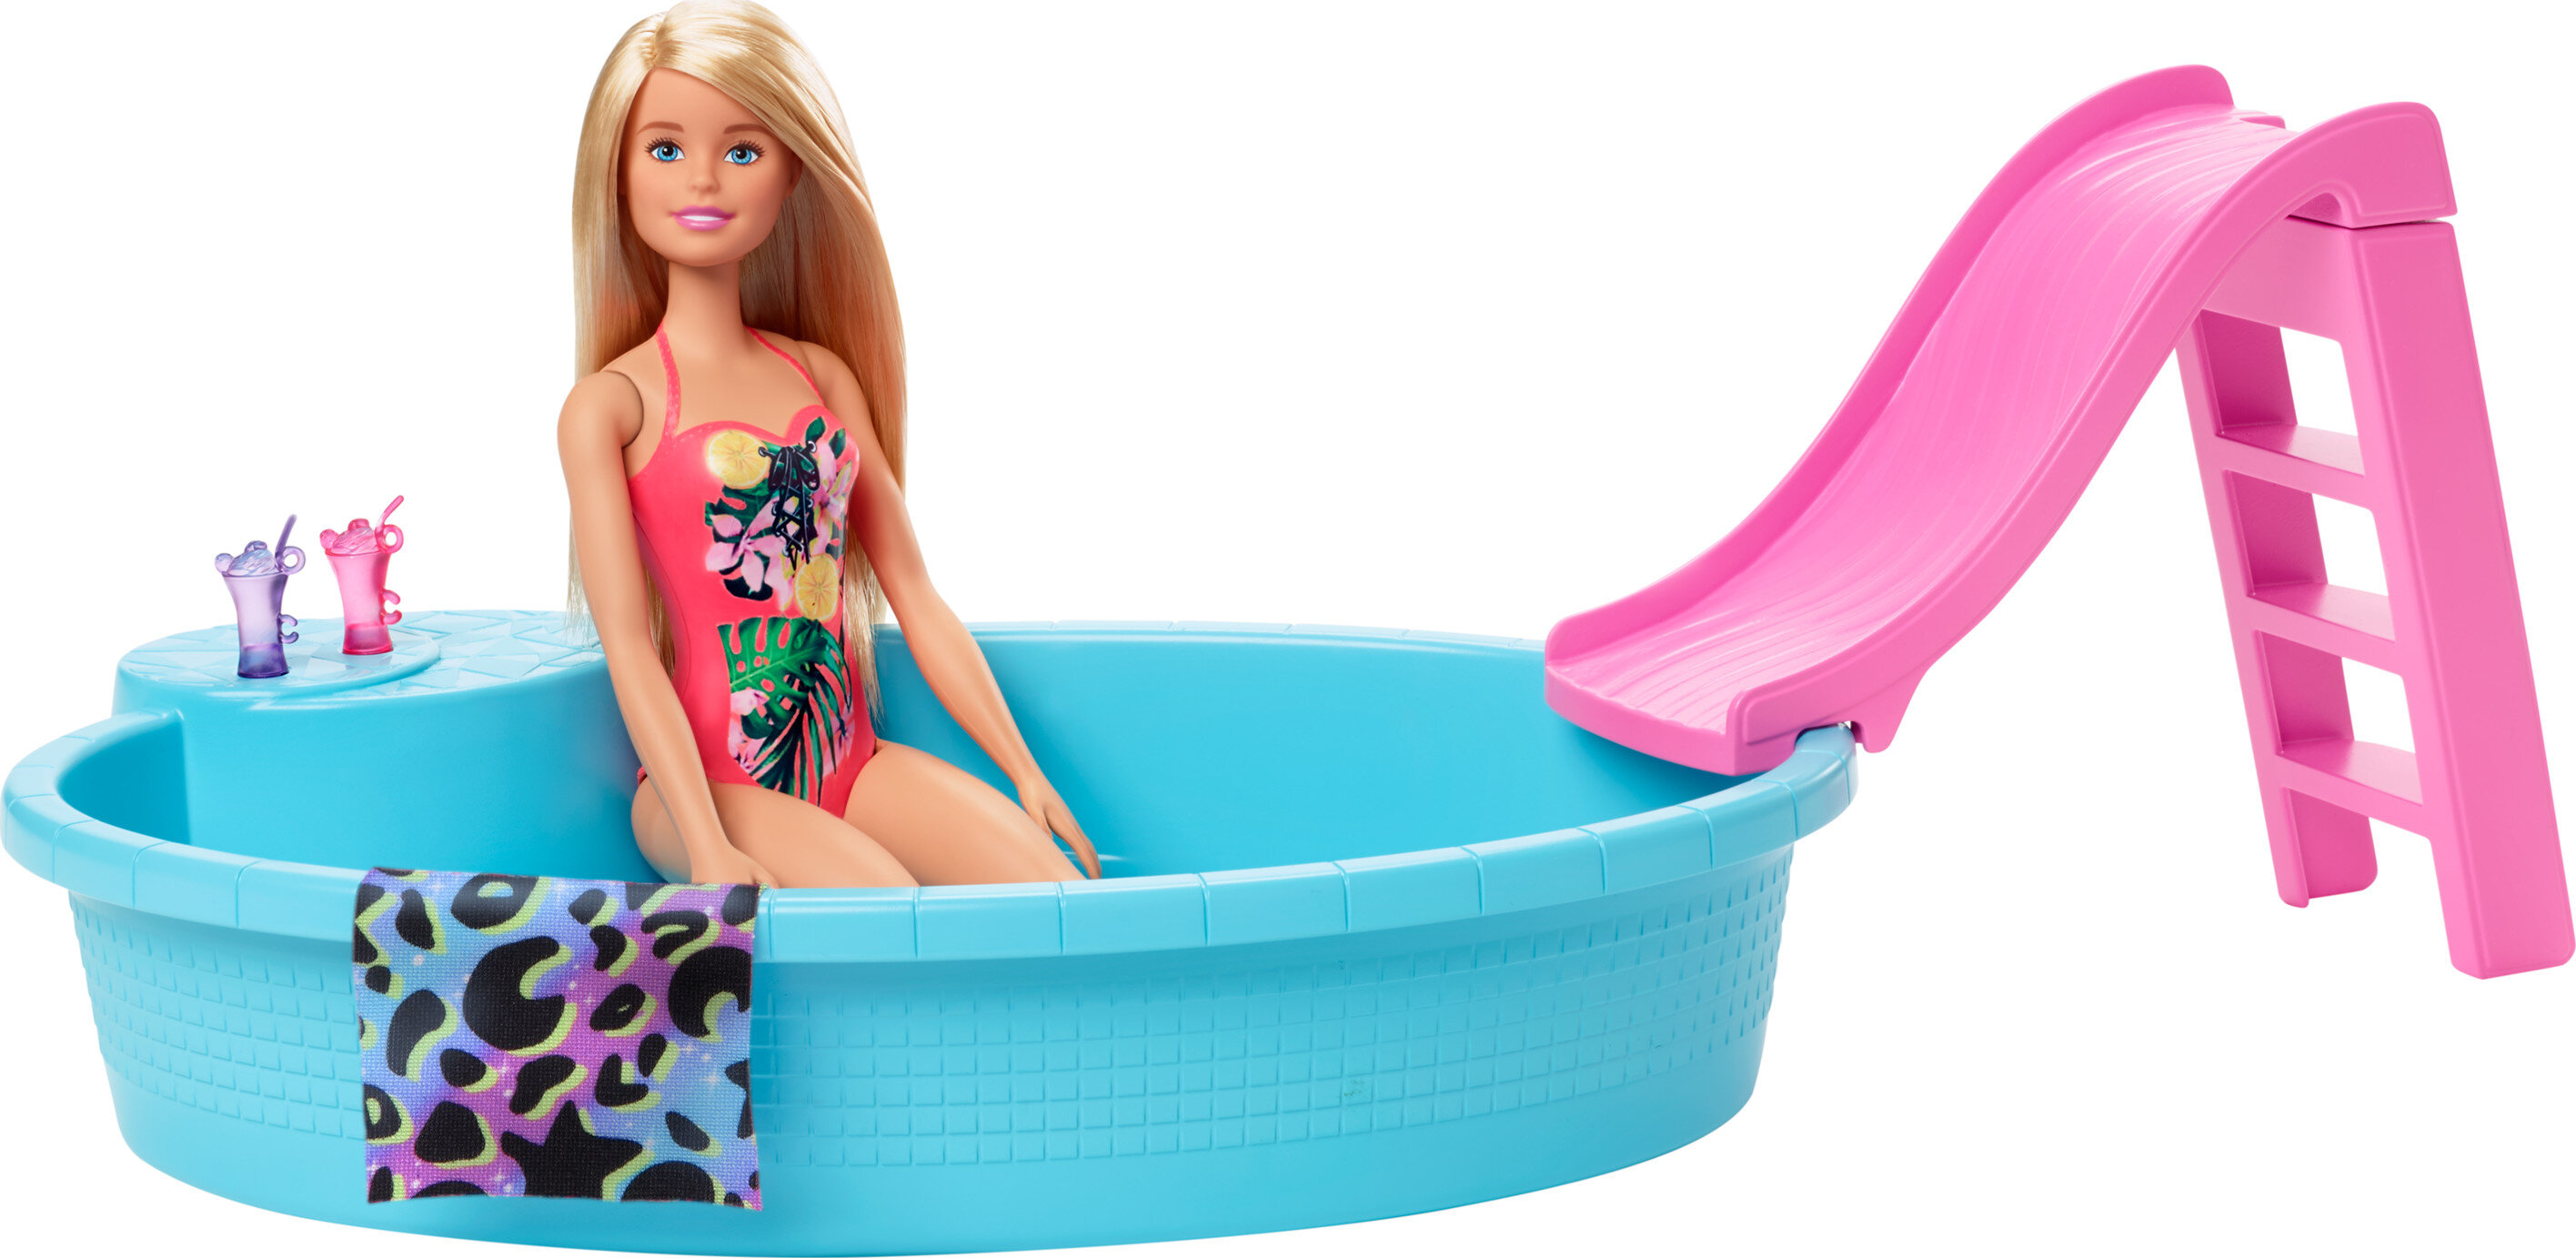 Barbie Doll and Pool Playset with Slide and Accessories, Blonde in Tropical Swimsuit - image 1 of 7